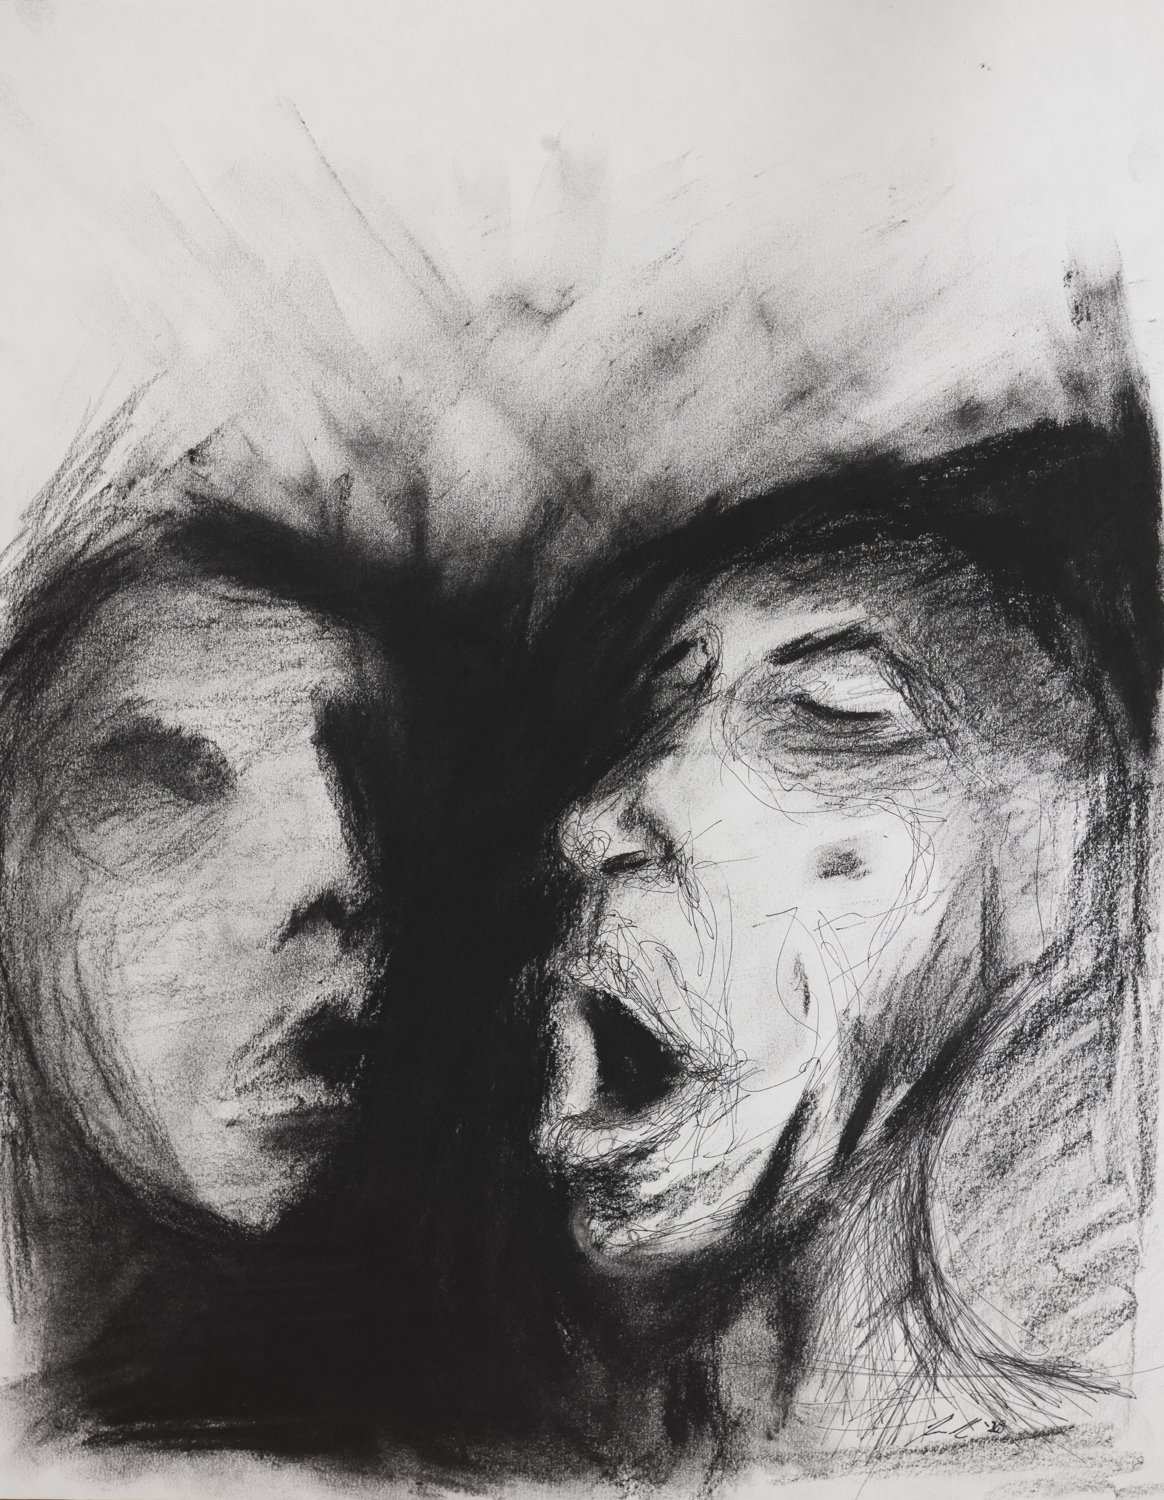   Untitled.       2021. Charcoal on Paper.  11 x 14 in (28 x 36.5 cm) 